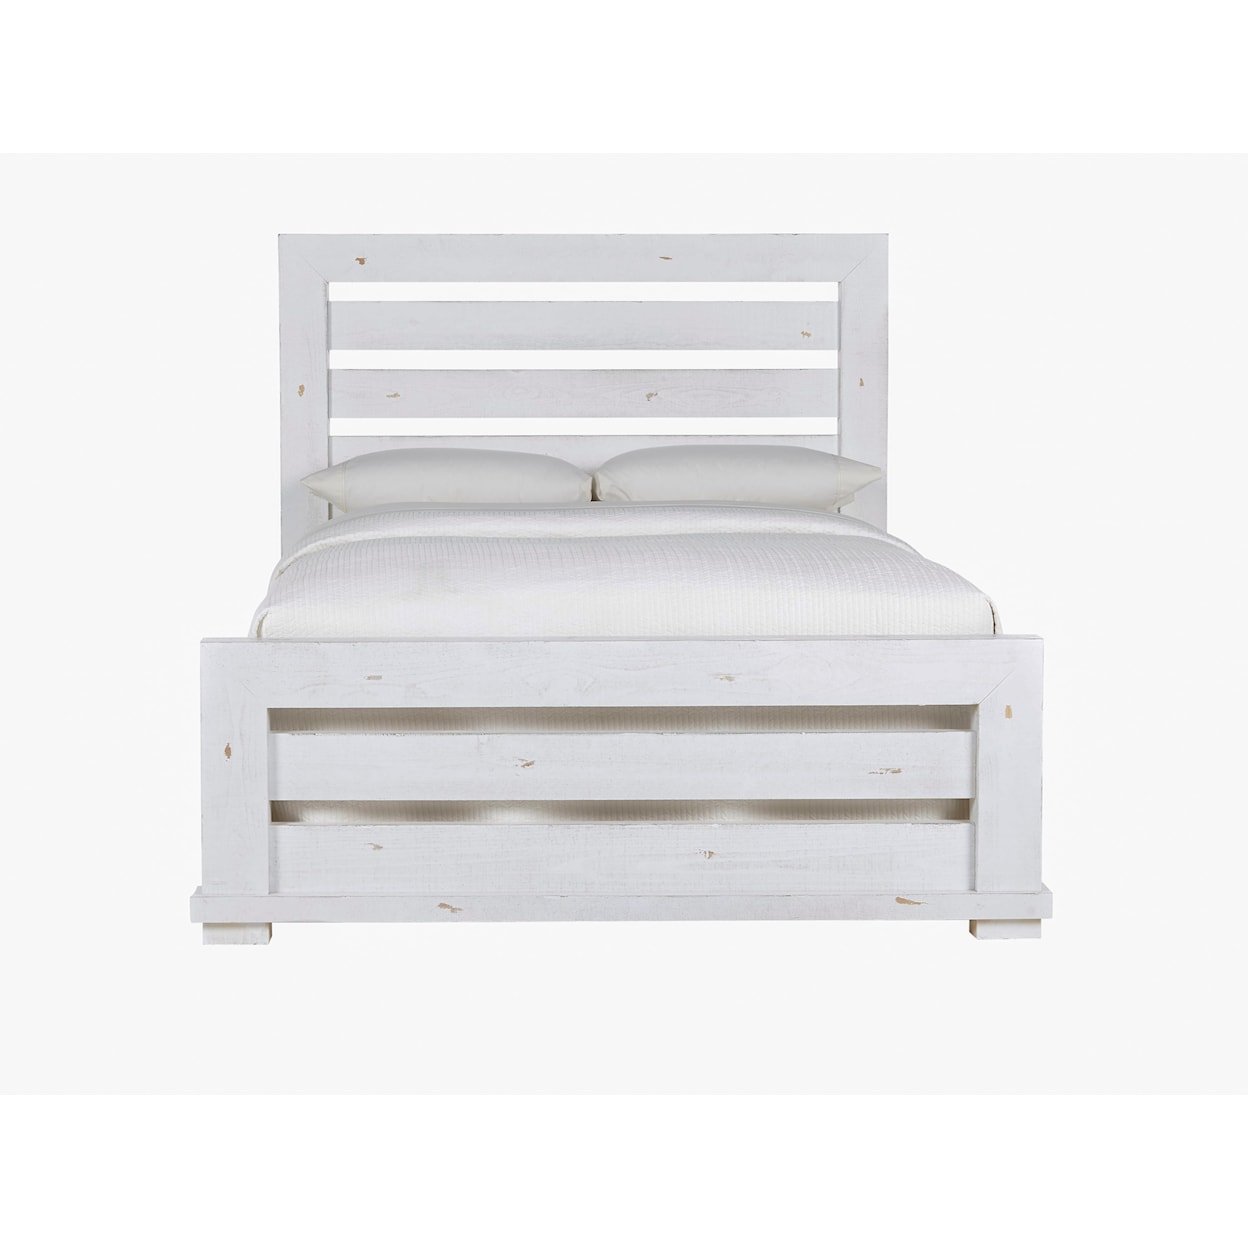 Carolina Chairs Willow Queen Slat Bed